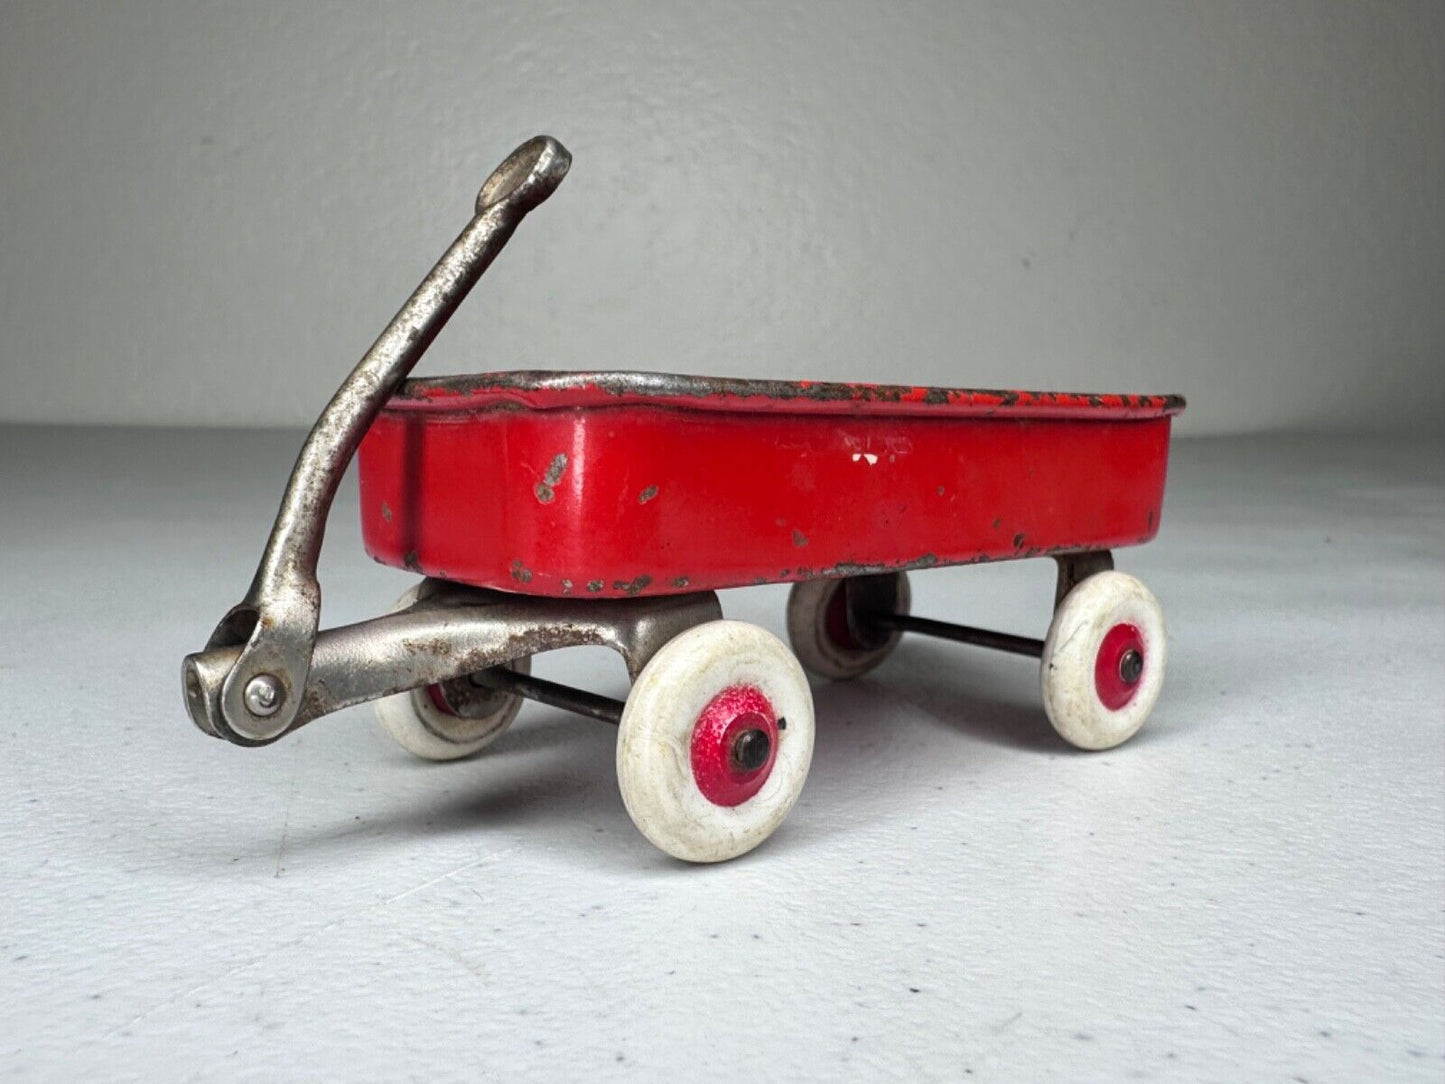 Vintage Miniature Radio Flyer Wagon - Retro Red Toy with White Rubber Wheels | Collectible - TreasuTiques